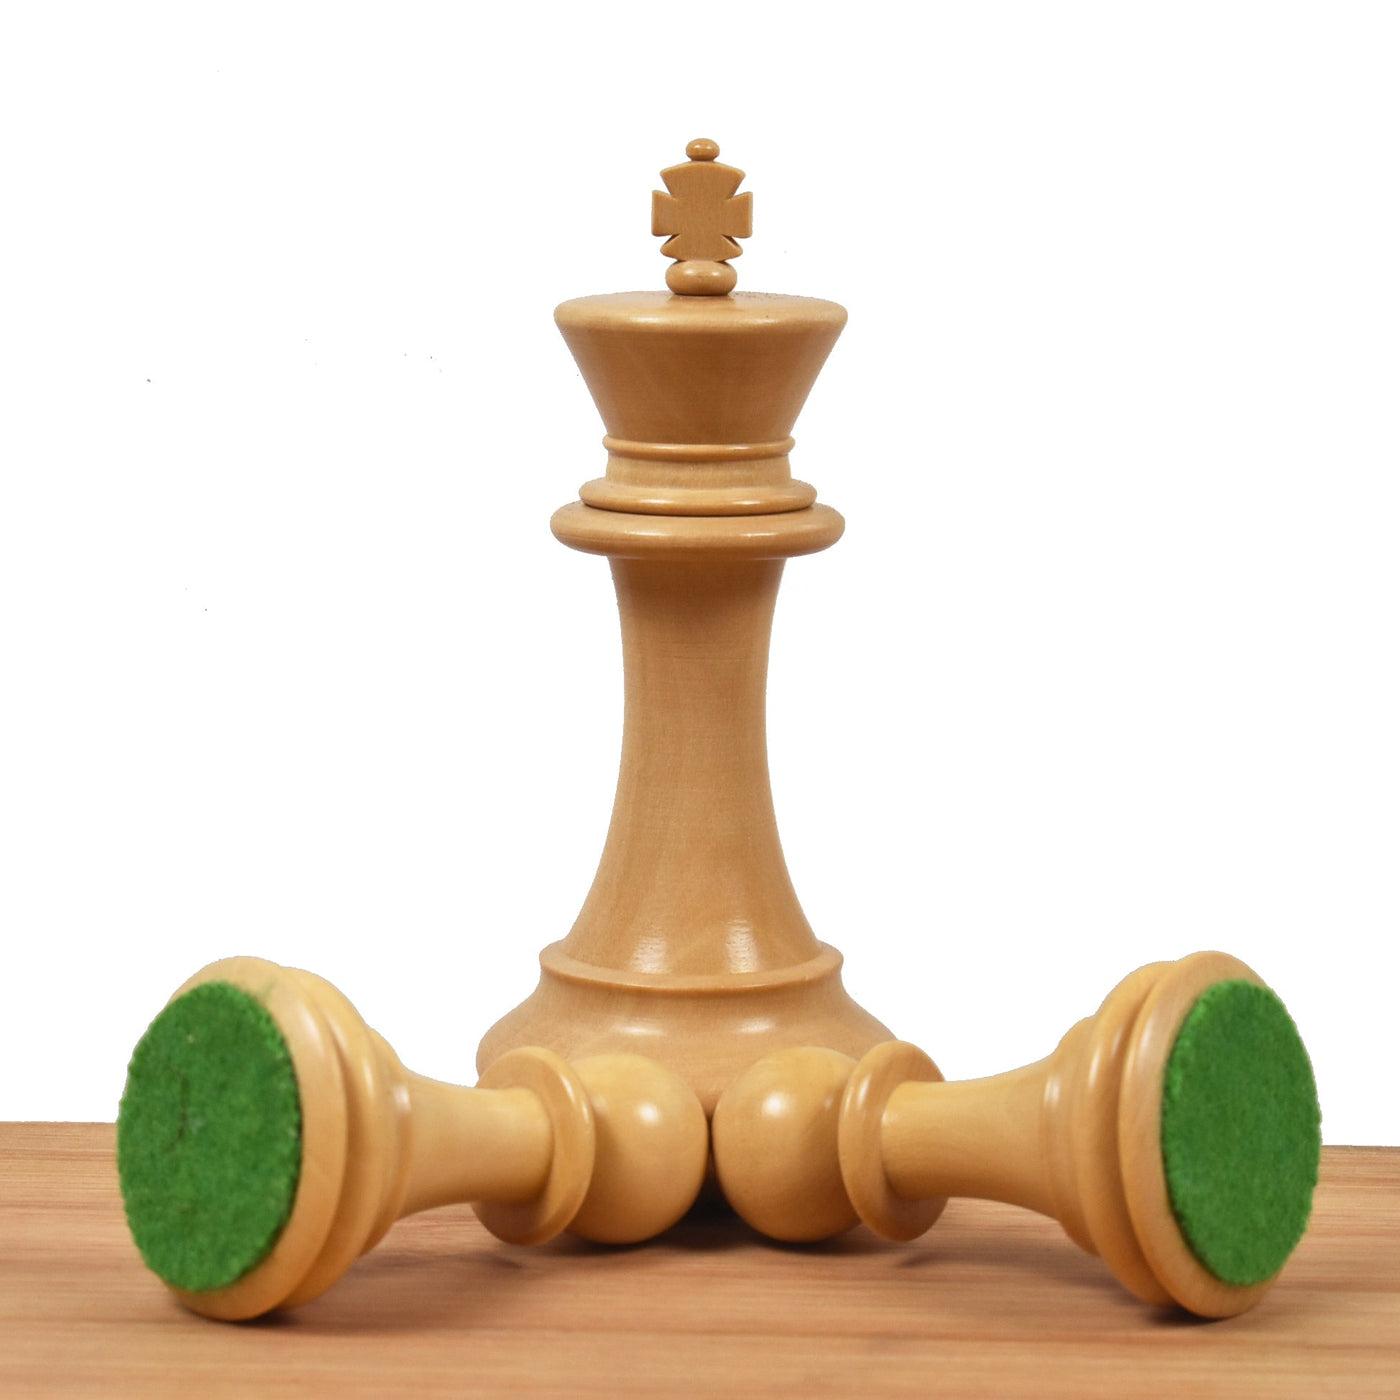 4.1″ Traveller Staunton Luxury Chess Set - Chess Pieces Only – Bud Rose Wood & Boxwood